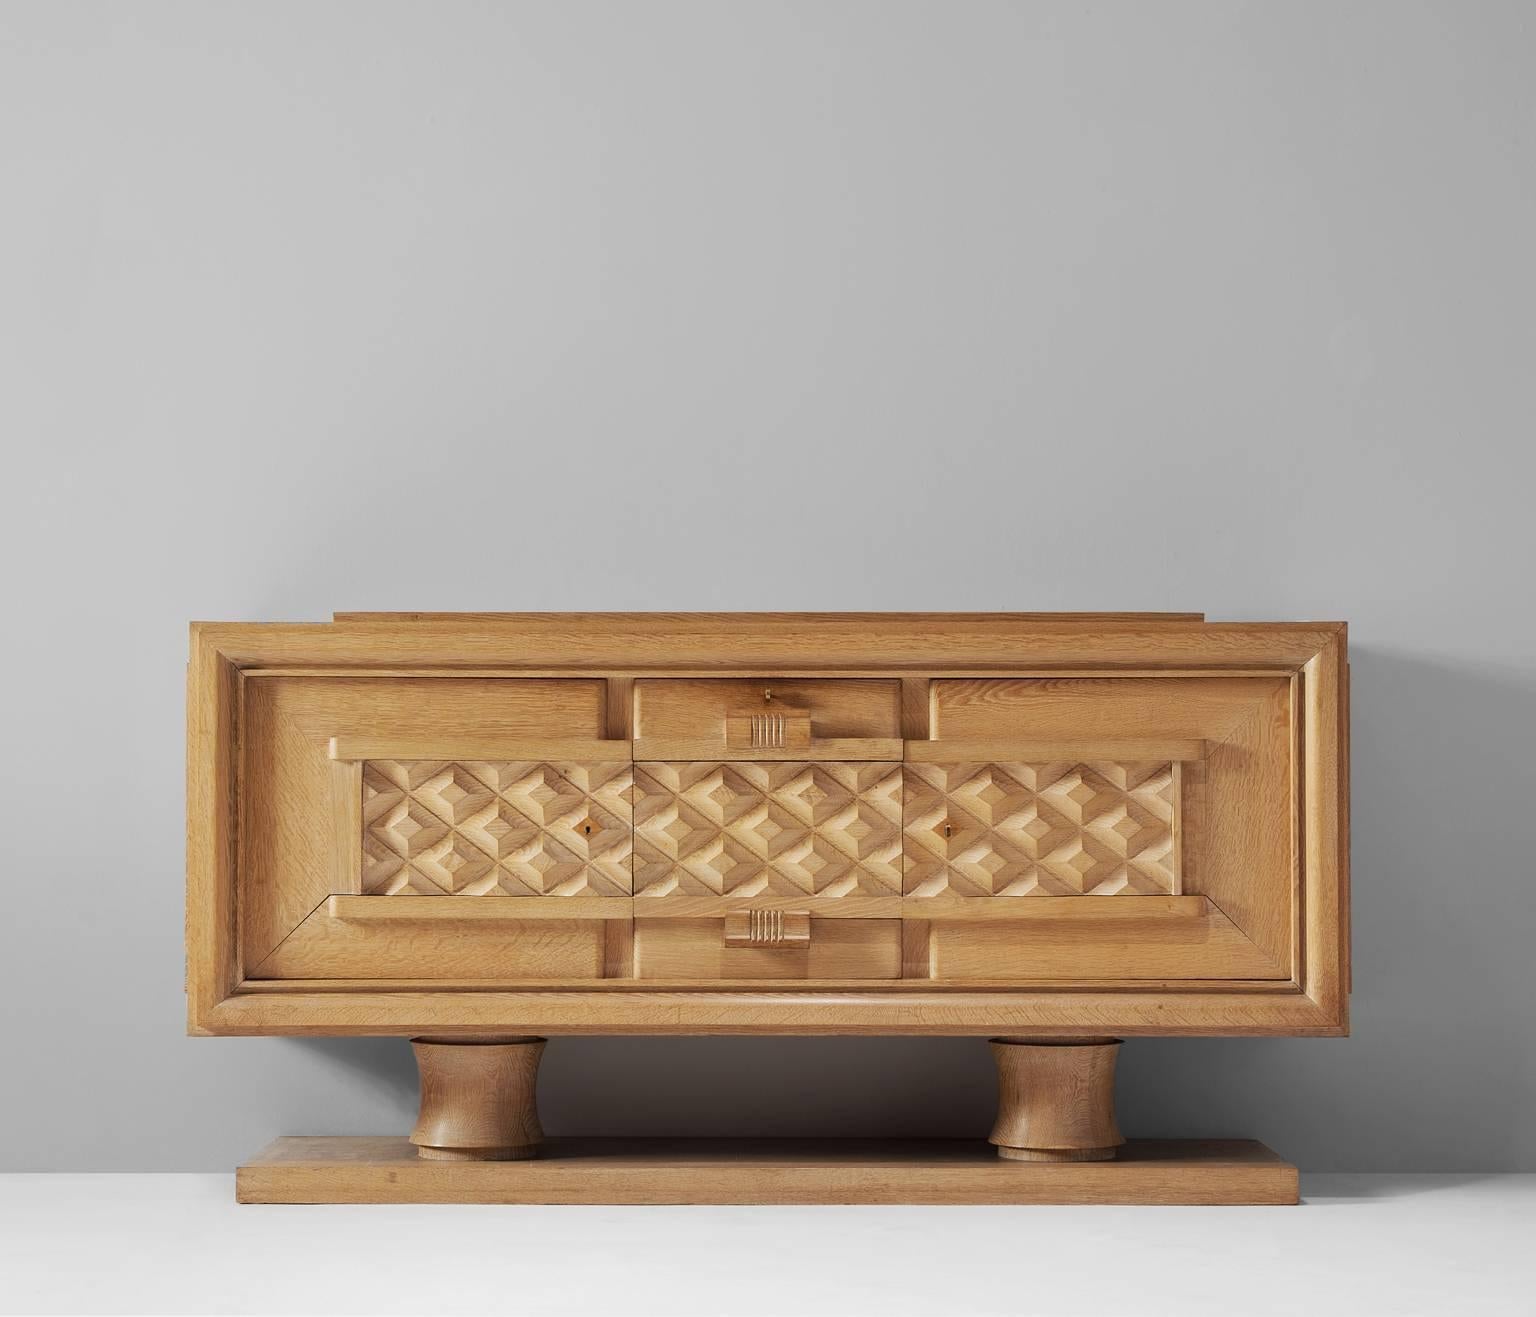 Credenza in oak by Charles Dudouyt, France, 1930s.

This French Art Deco oak credenza originates from the 1930s and is designed by the French decorator Charles Dudouyt. The door panels show an interesting pattern of solid natural wooden elements,